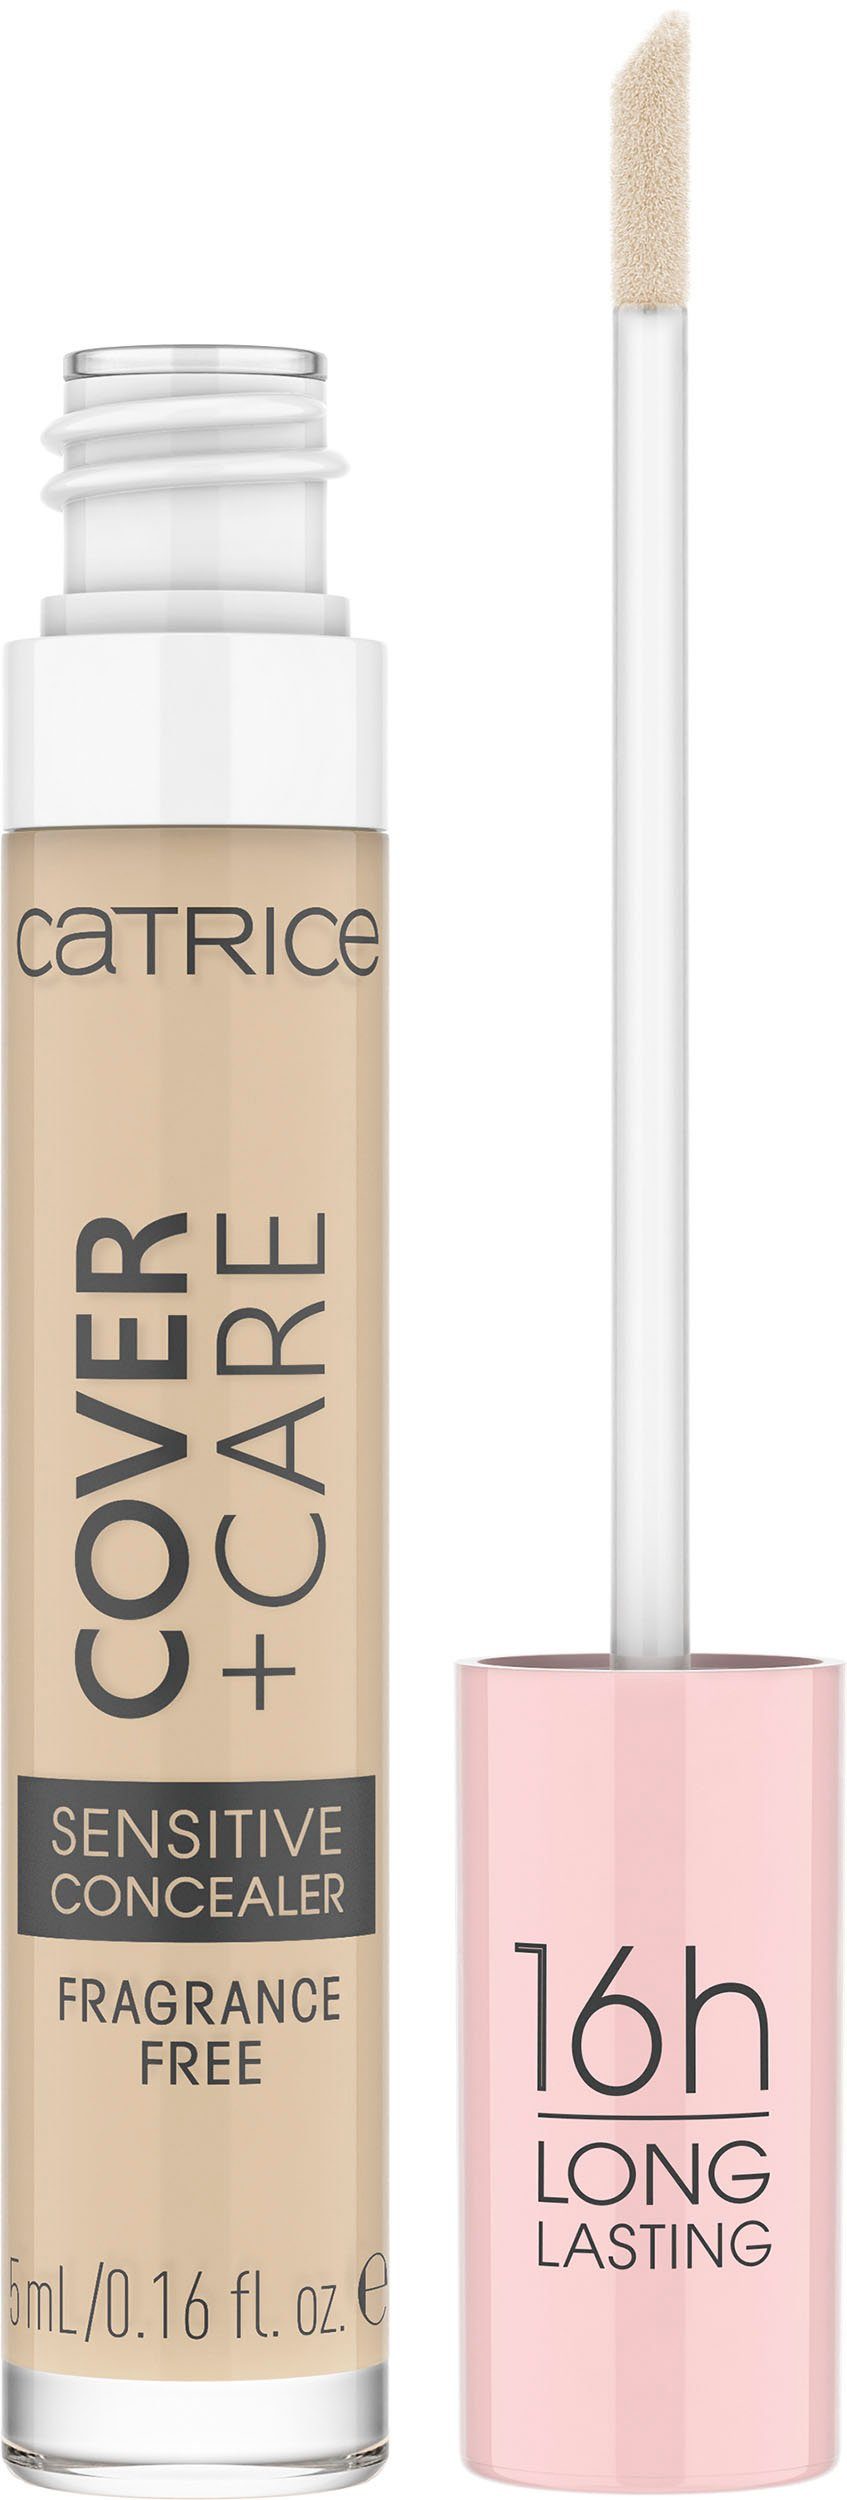 Catrice Concealer 010C + Care Concealer, Cover Sensitive nude 3-tlg. Catrice